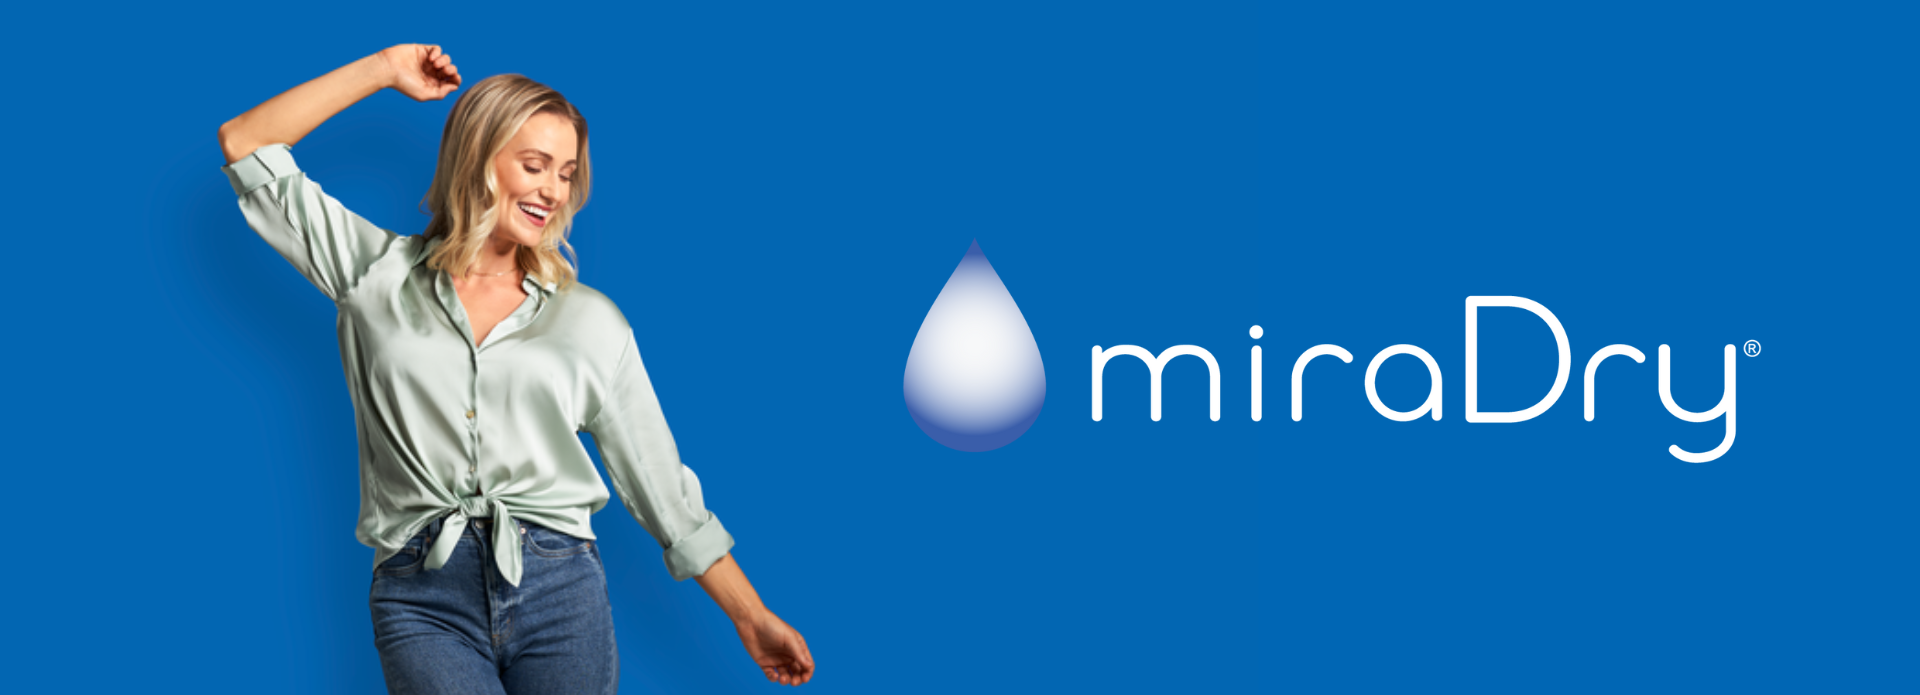 Woman posing with her arm raised in front of a blue background with a white miraDry logo.